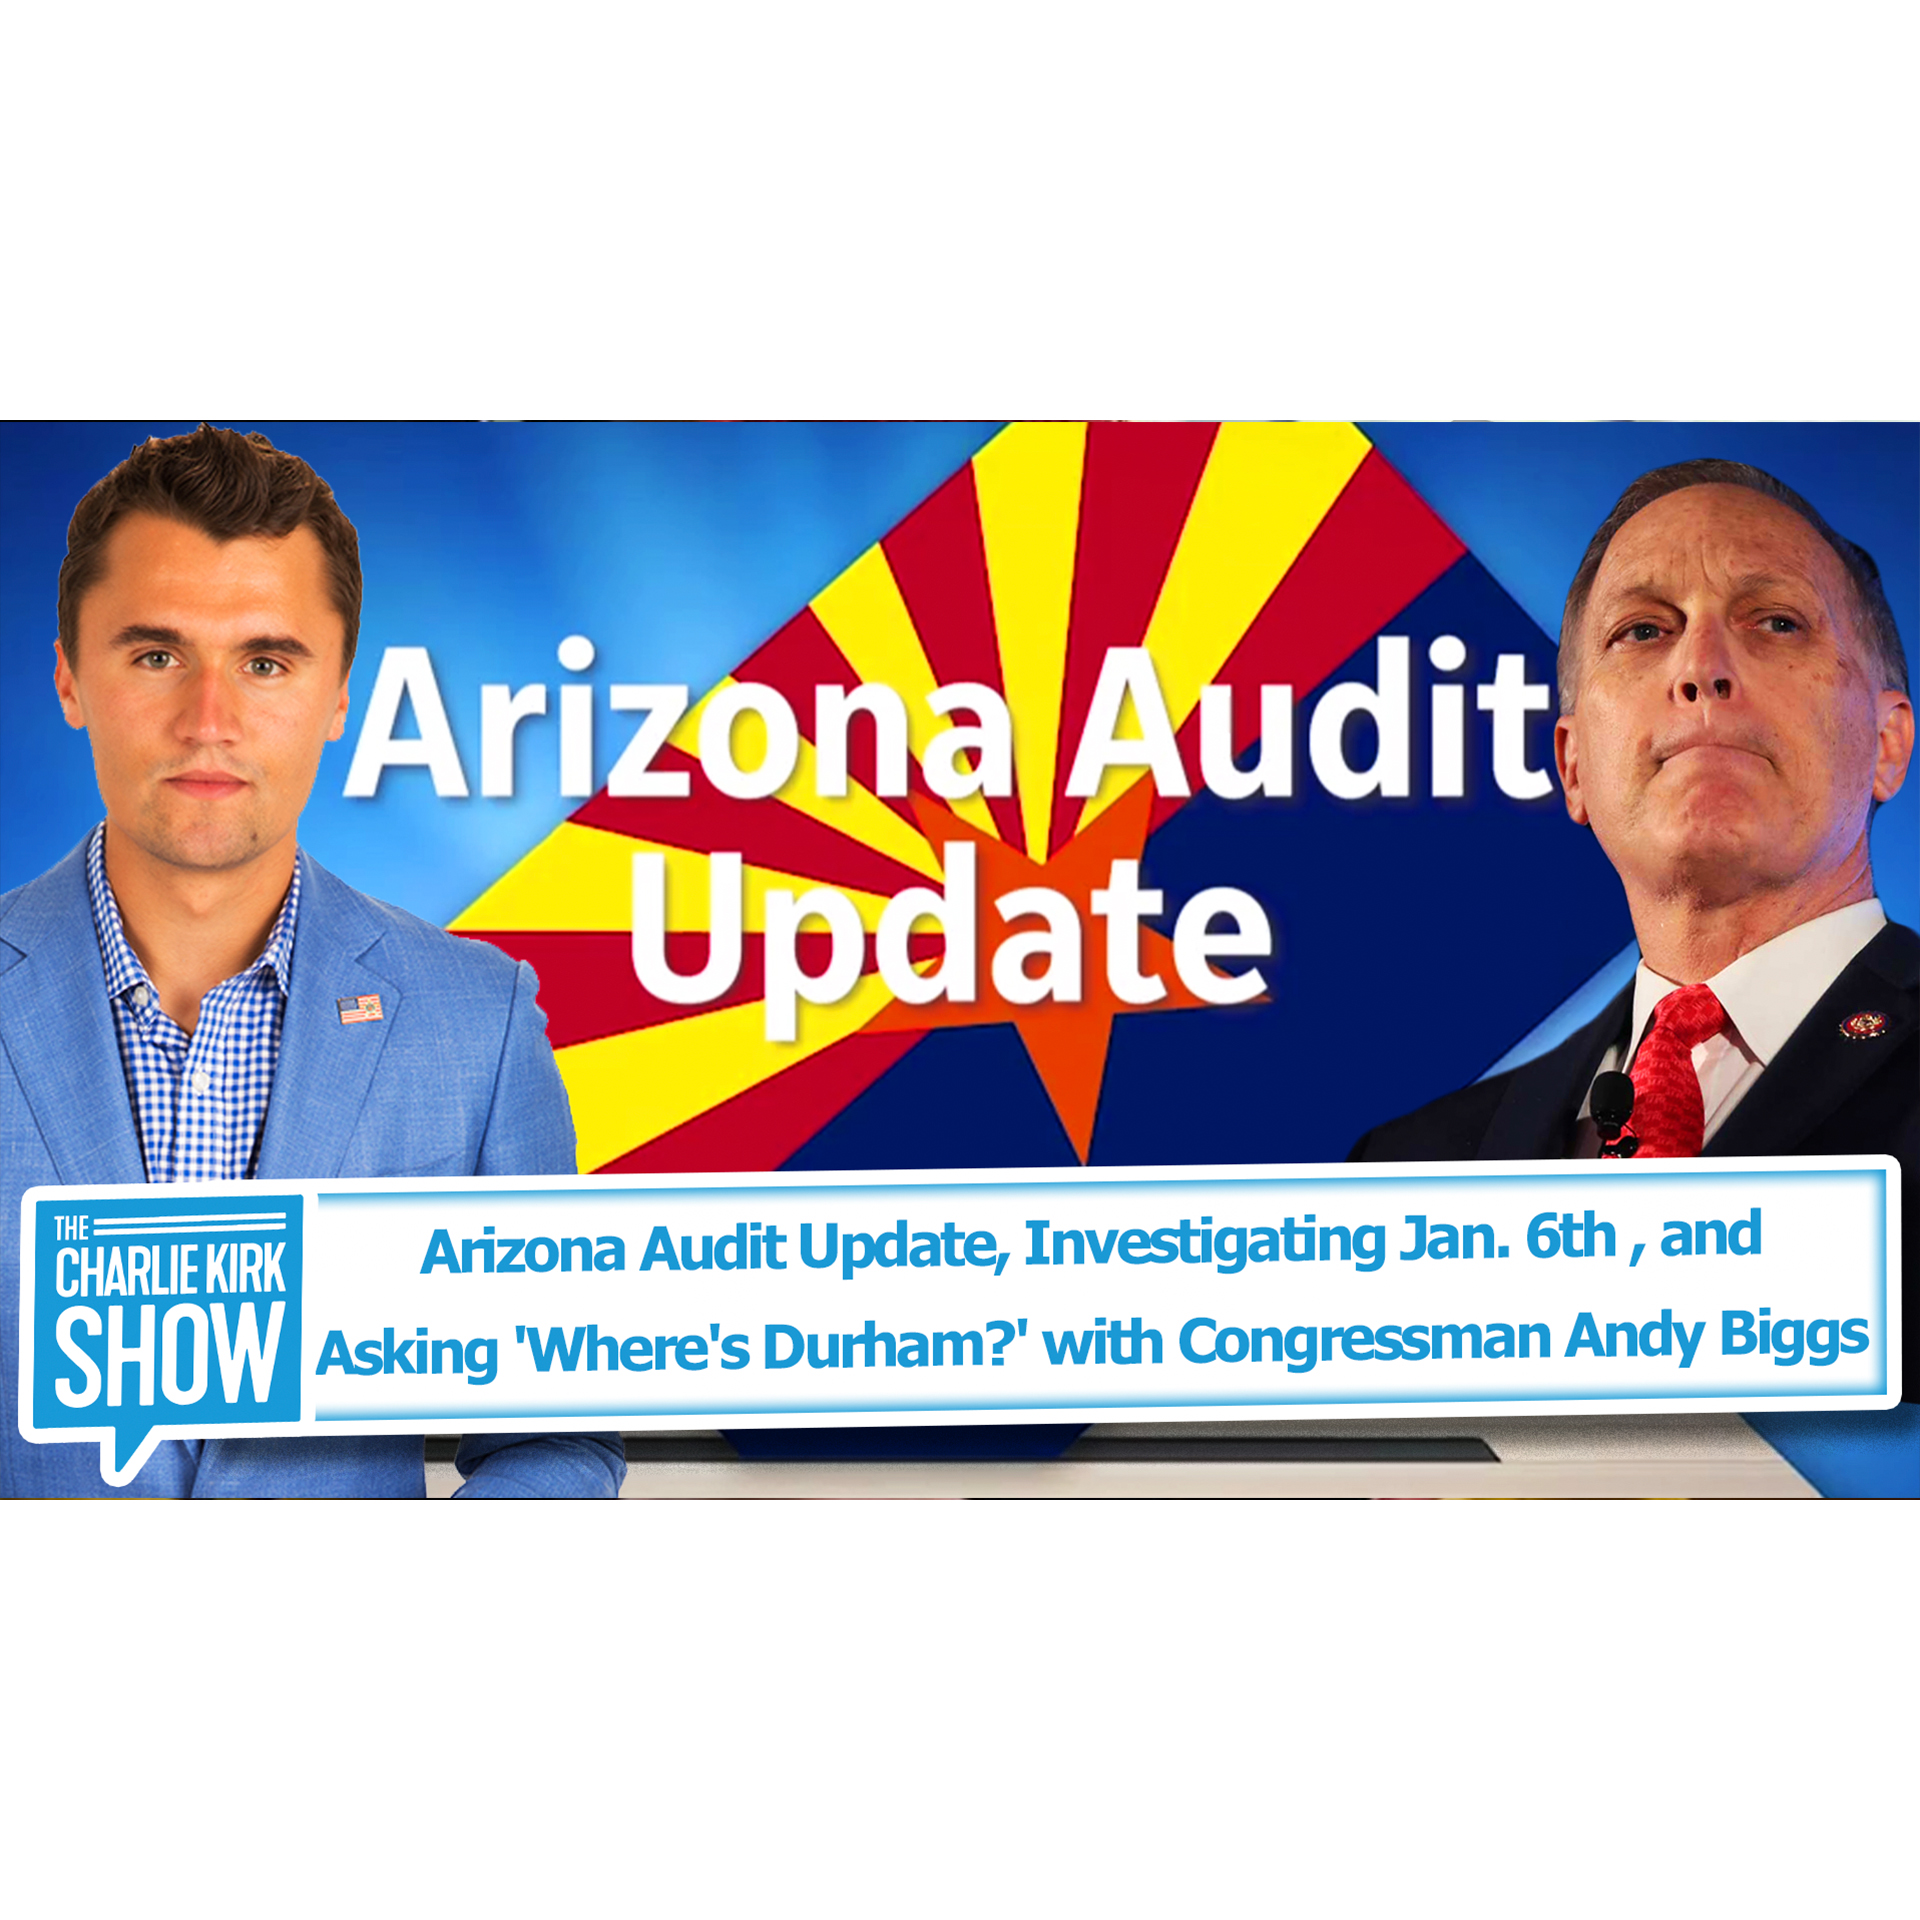 Arizona Audit Update, Investigating Jan. 6th , and Asking 'Where's Durham?' with Congressman Andy Biggs